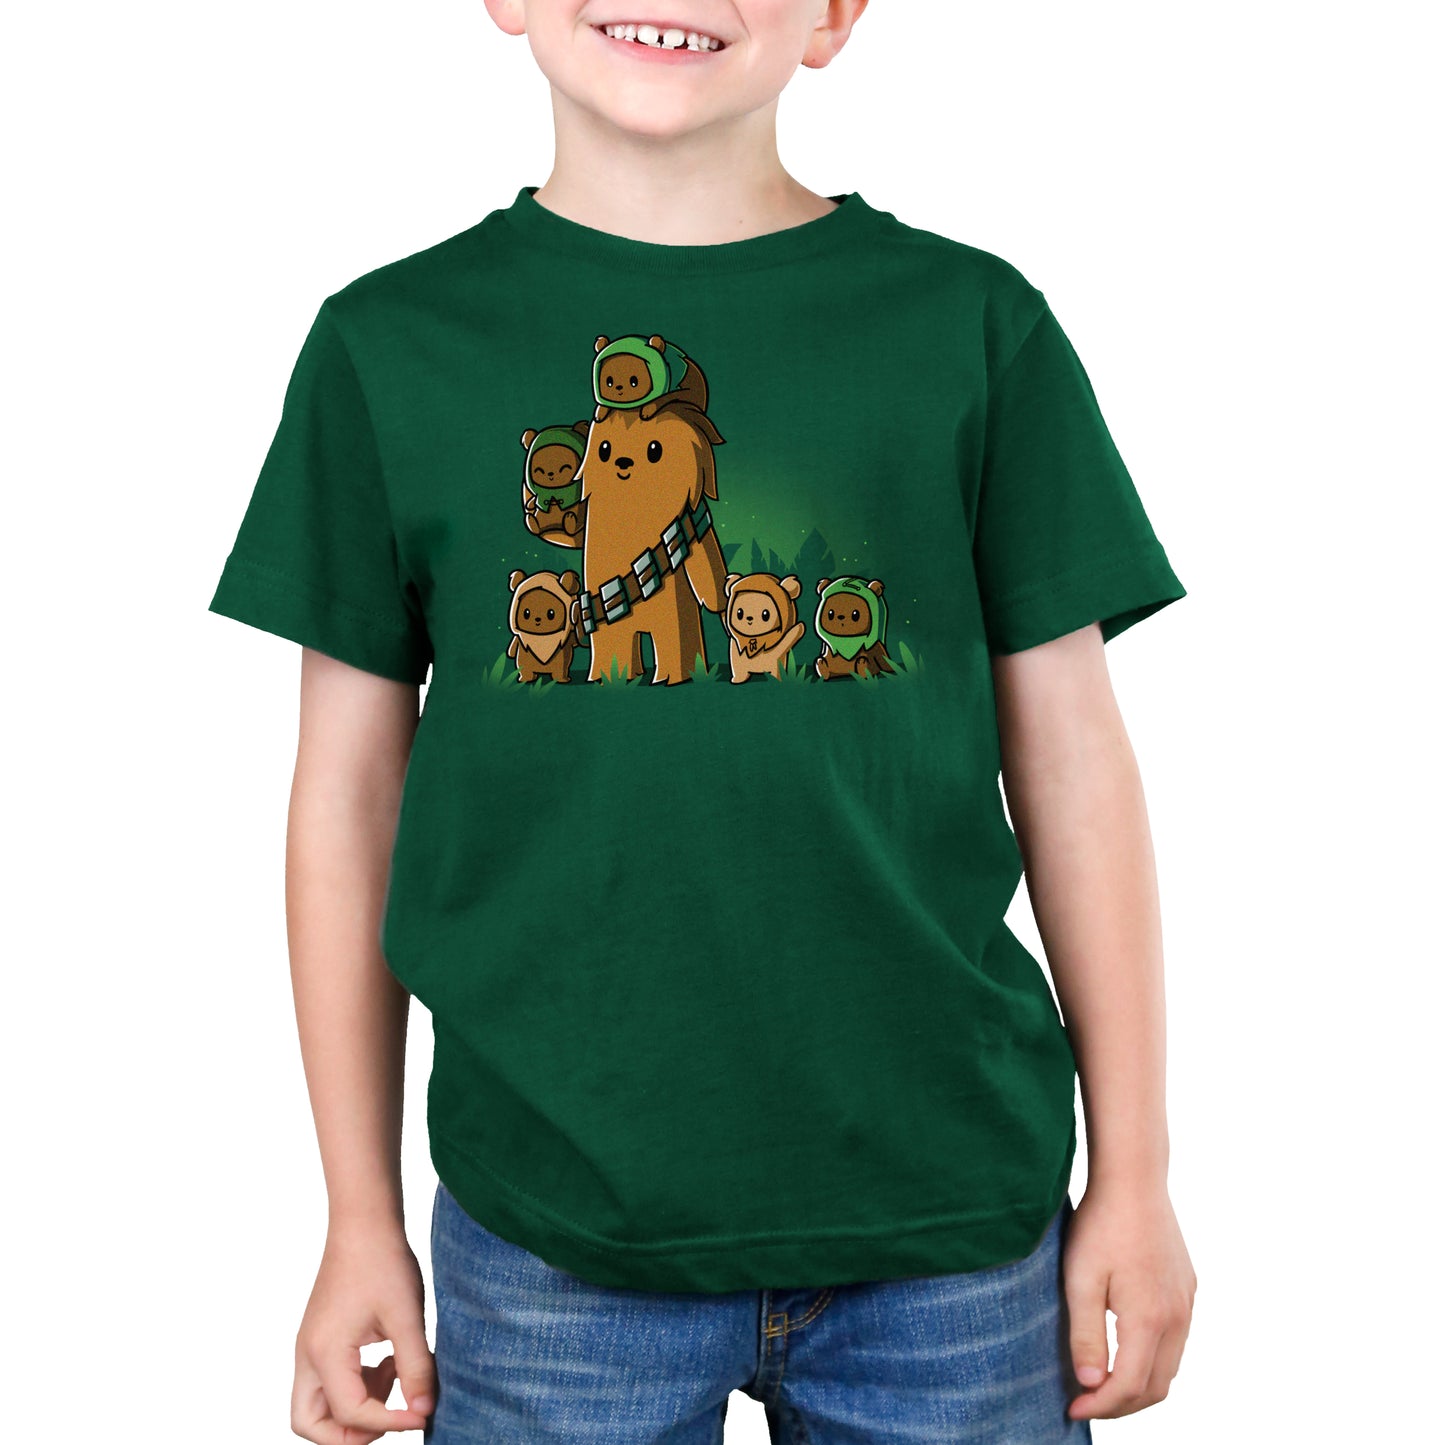 A young boy wearing a green t-shirt, inspired by Star Wars Chewbacca and Ewoks.